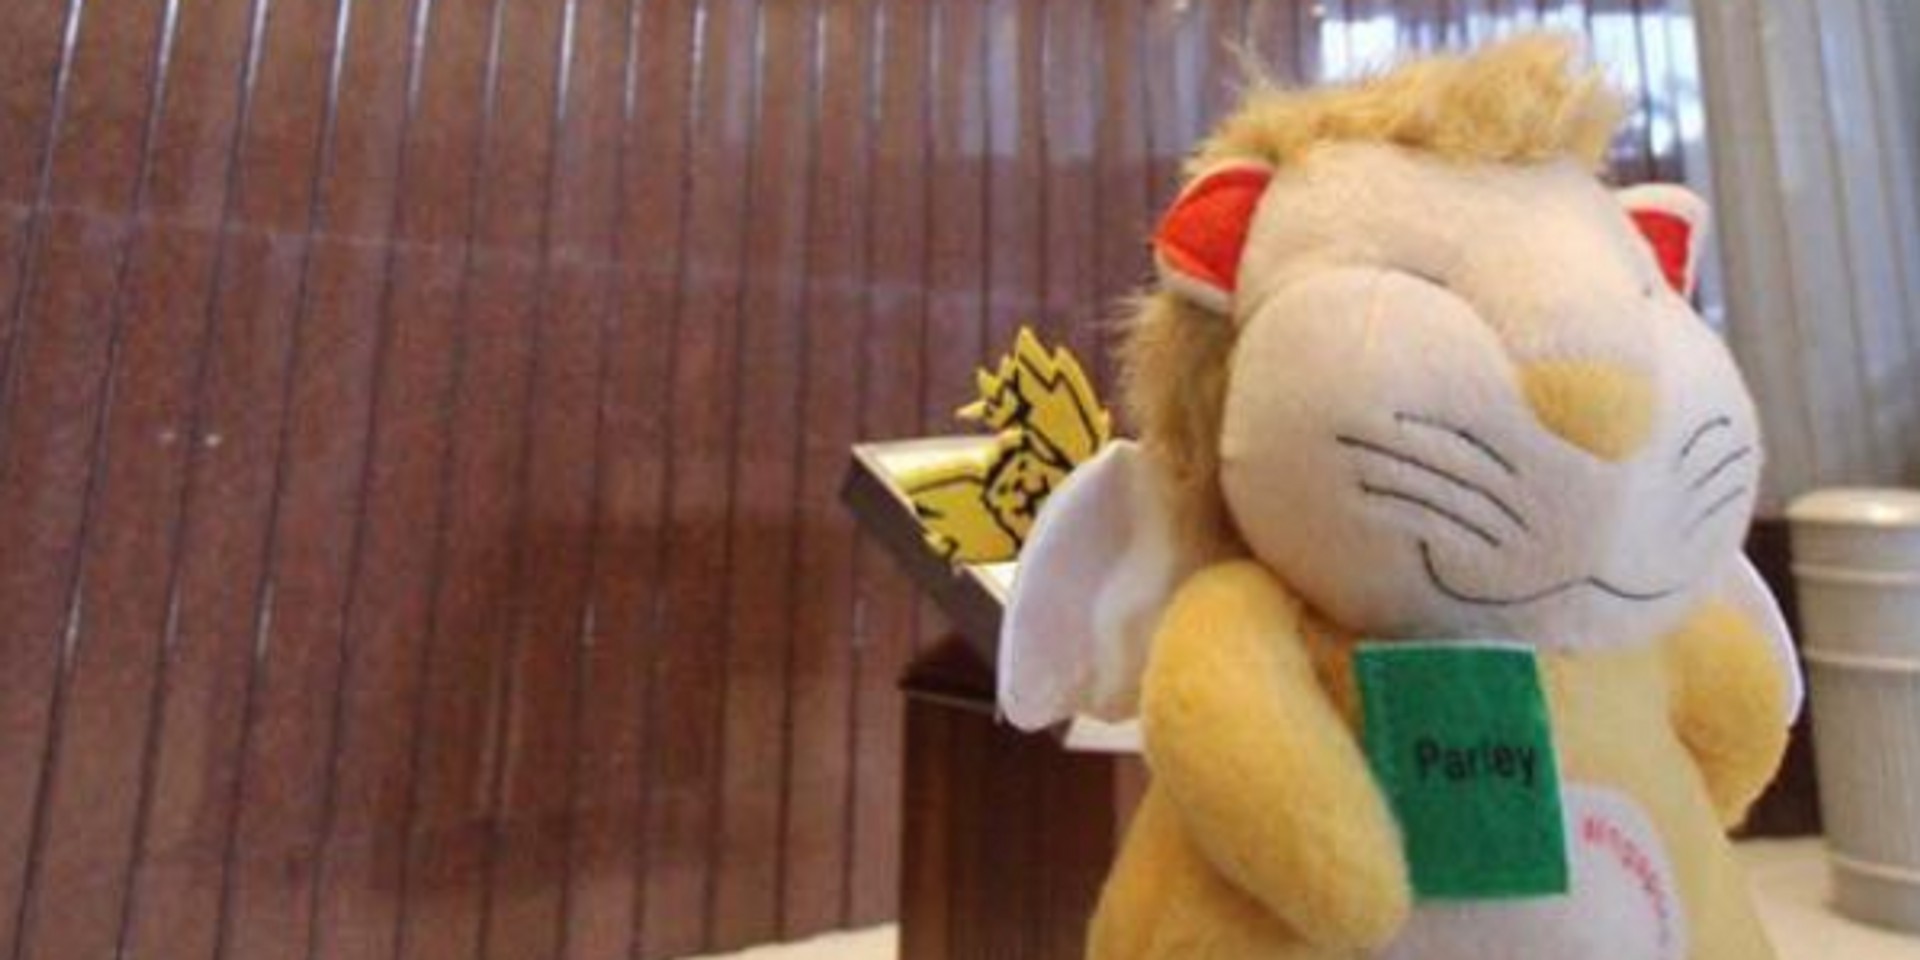 Singapore Parliament's new winged lion mascot digs songs by Camila Cabello, Sam Smith etc